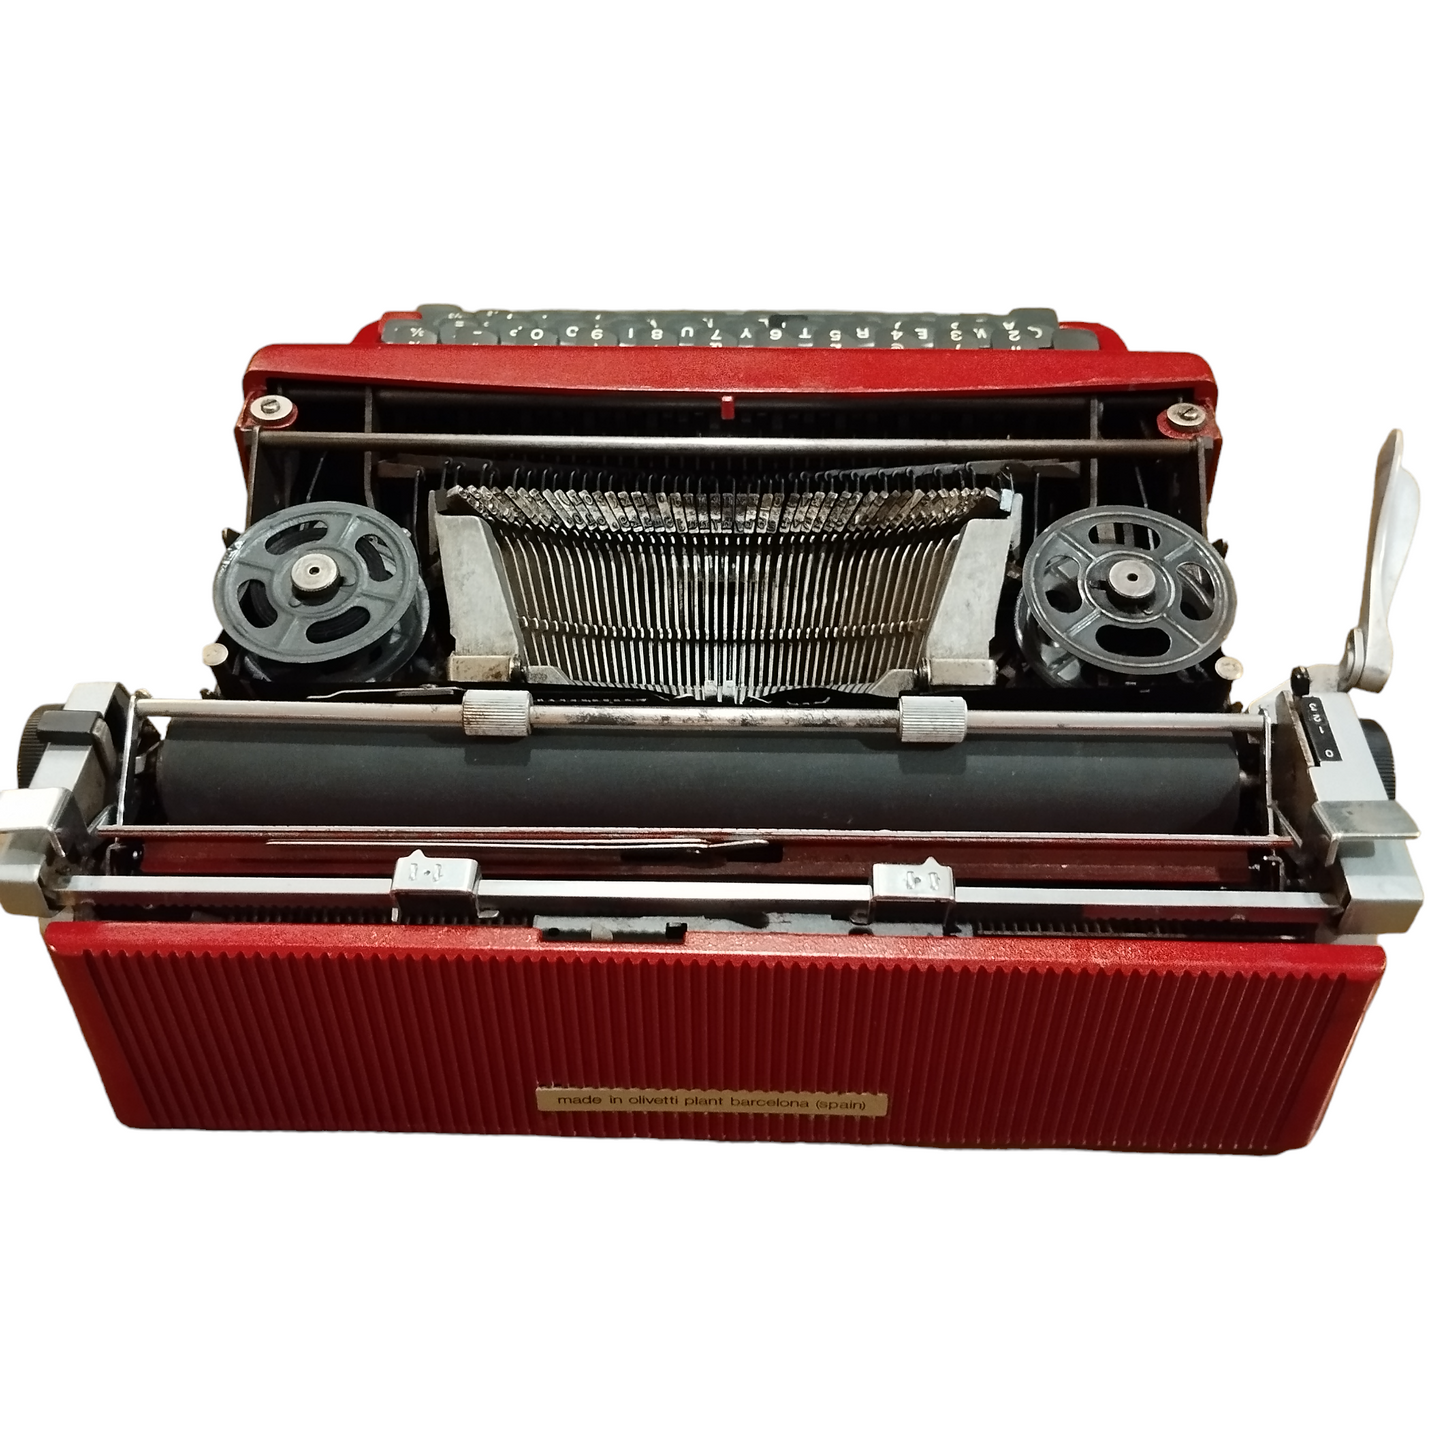 Image of Olivetti Lettera 32 Typewriter. Available from universaltypewritercompany.in